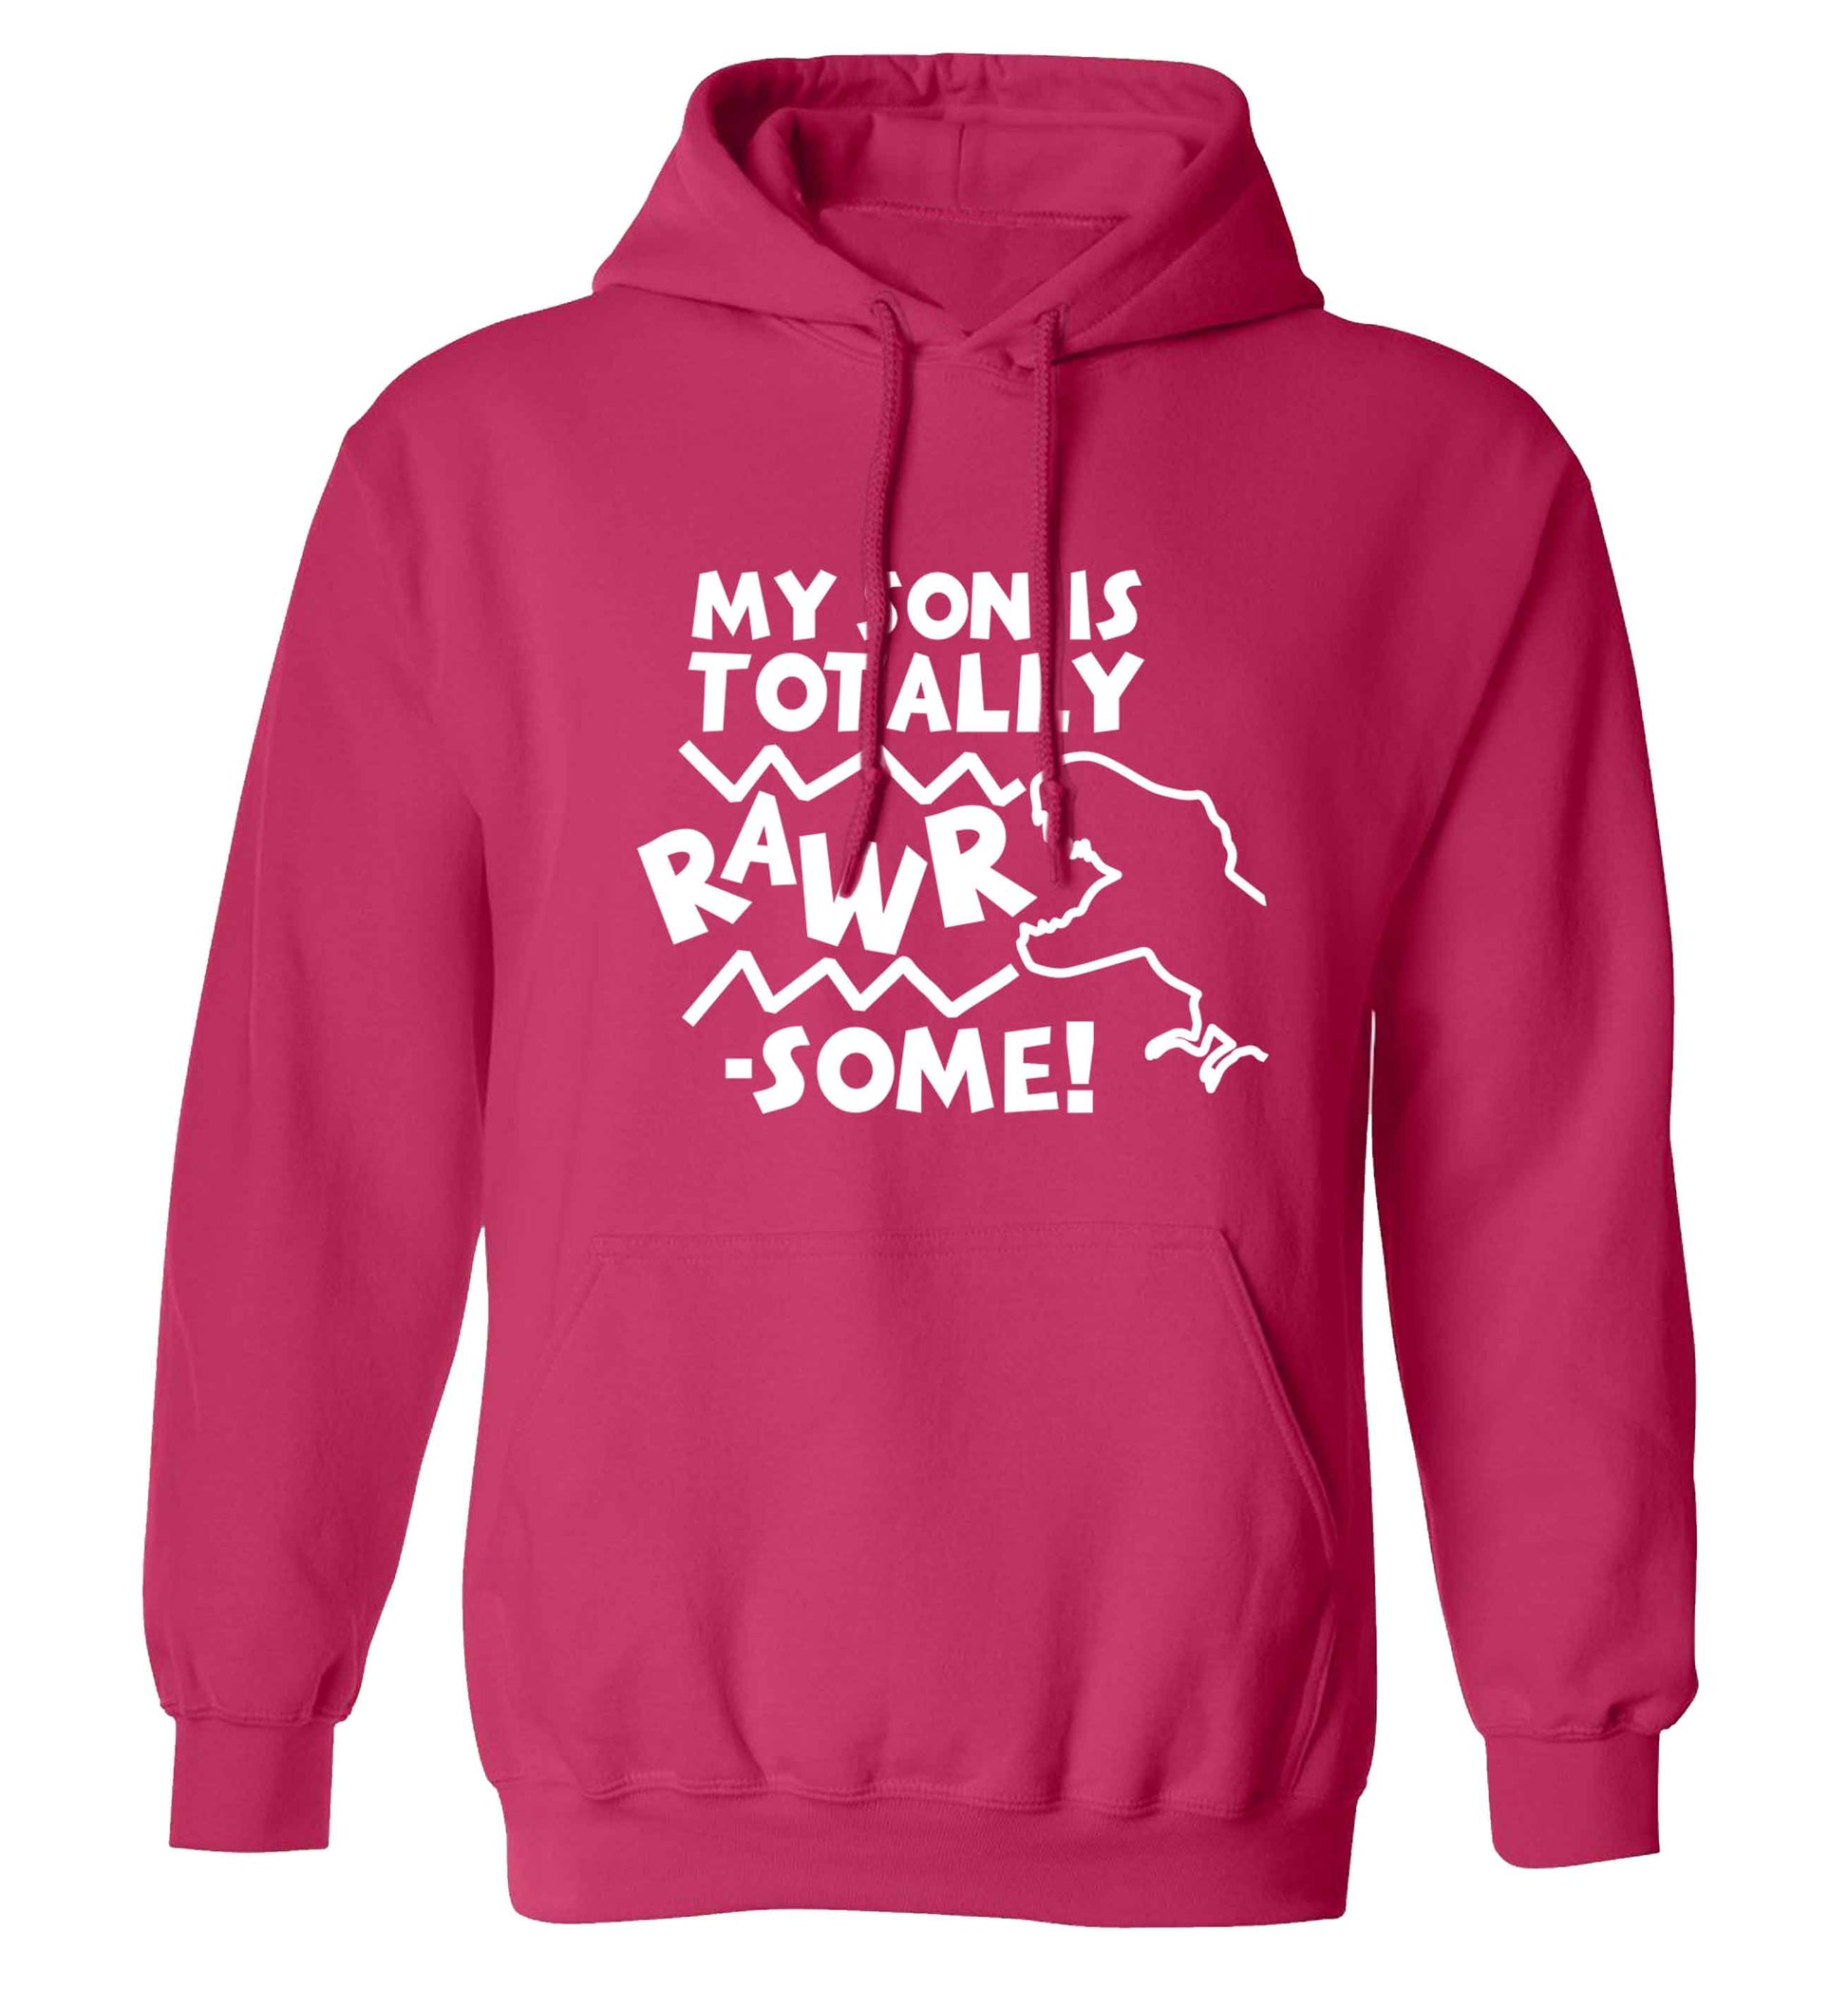 My son is totally rawrsome adults unisex pink hoodie 2XL